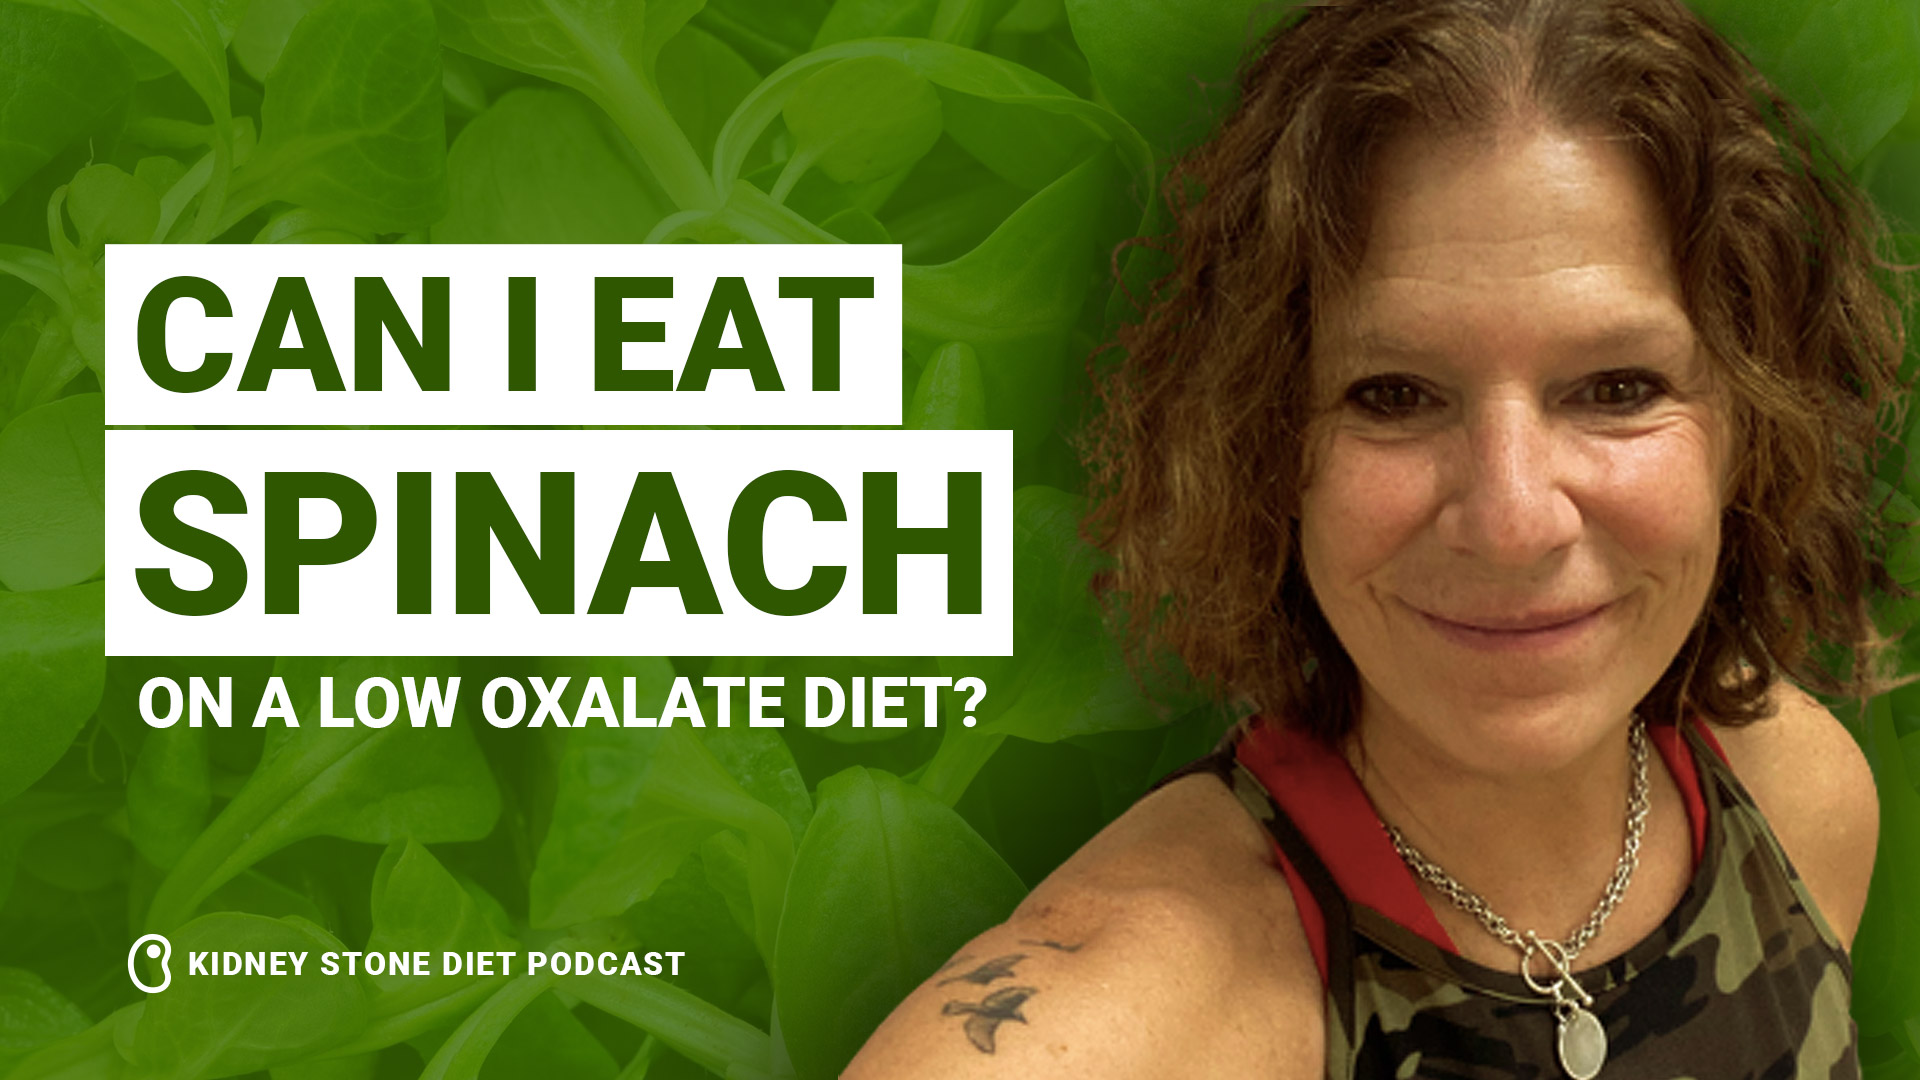 Can I eat spinach on a low oxalate diet?